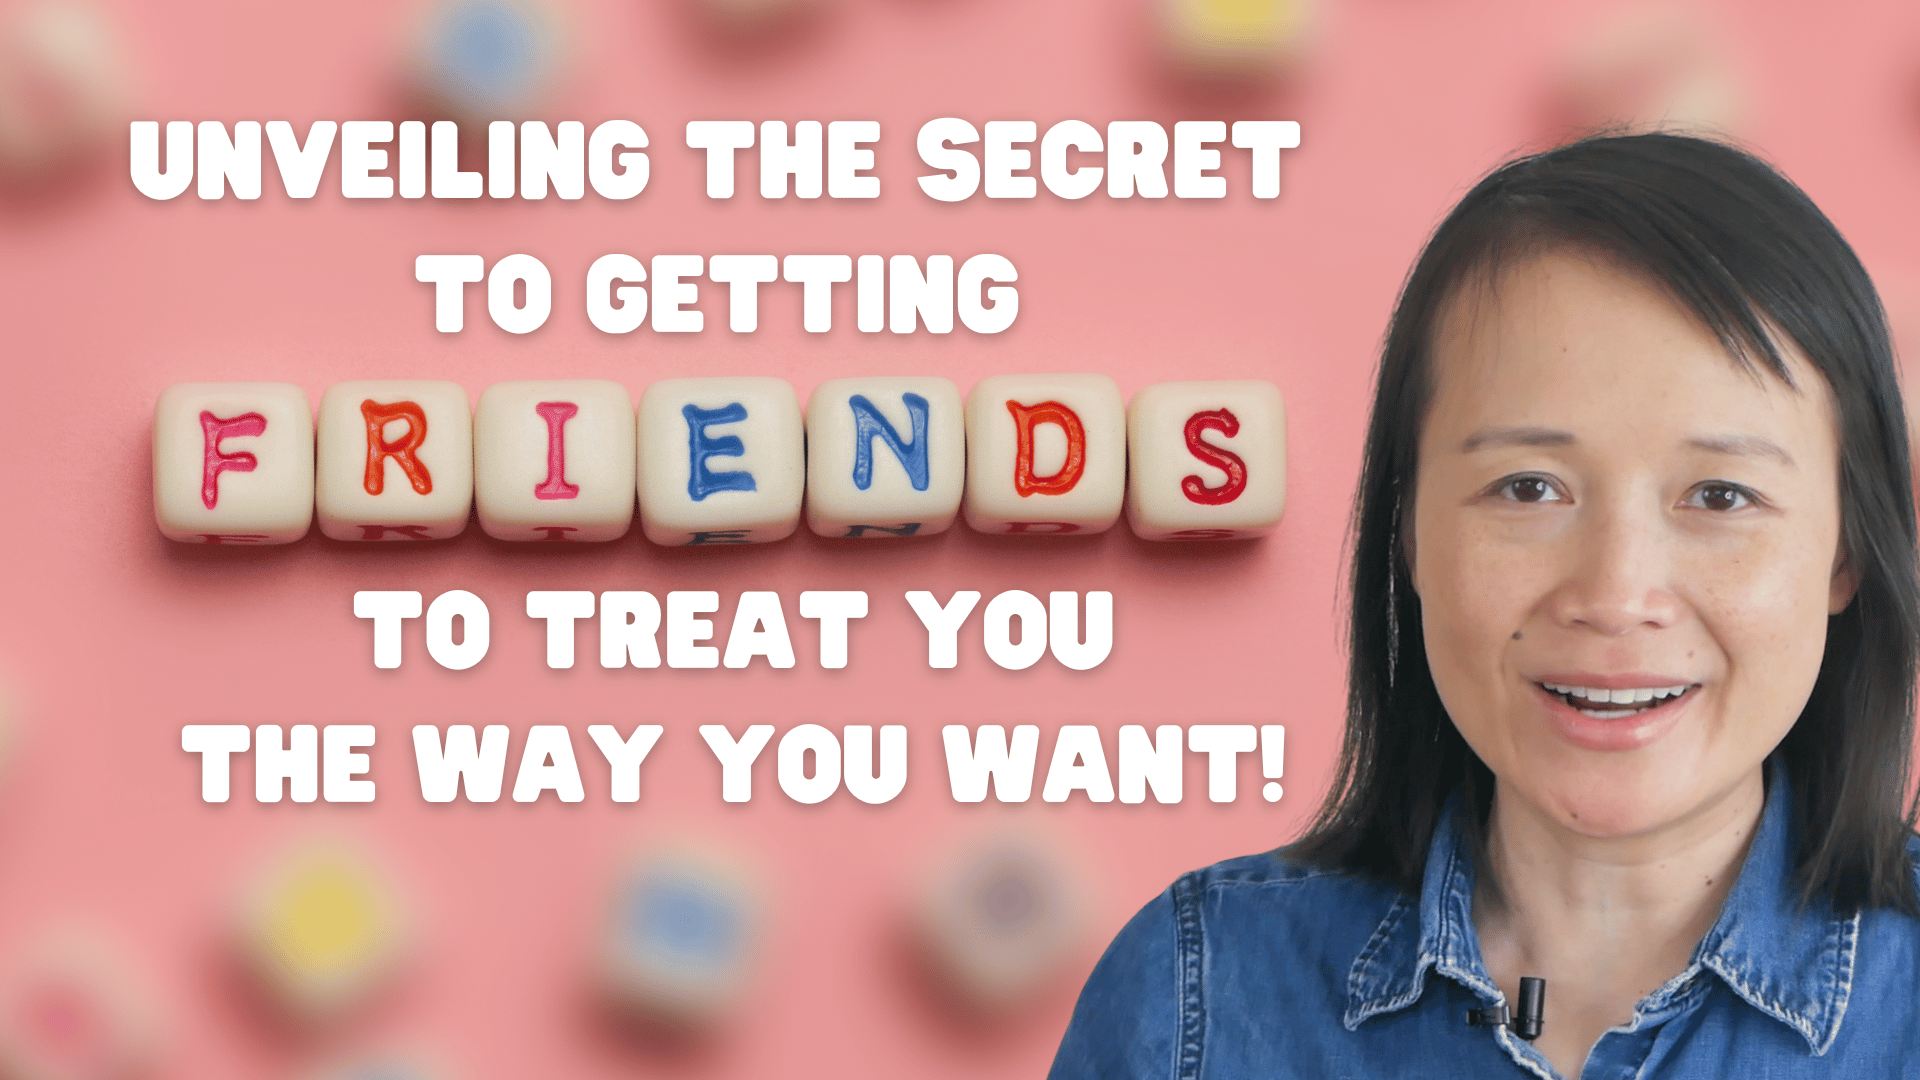 6 Steps to Identify How You Feel Your Friends Should Treat You